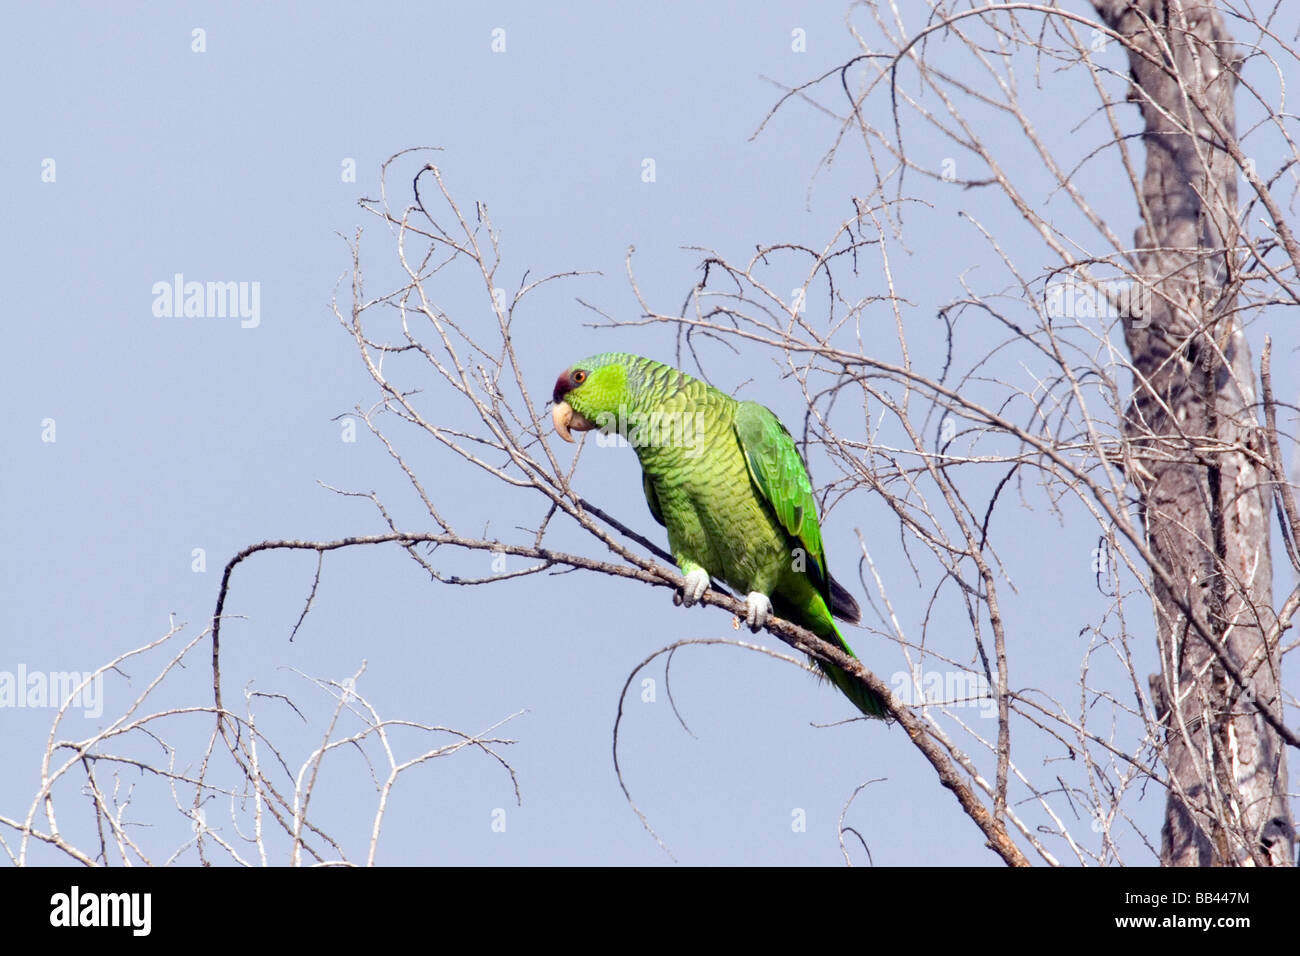 USA - California - San Diego County - Lilac-crowned Parrot Stock Photo